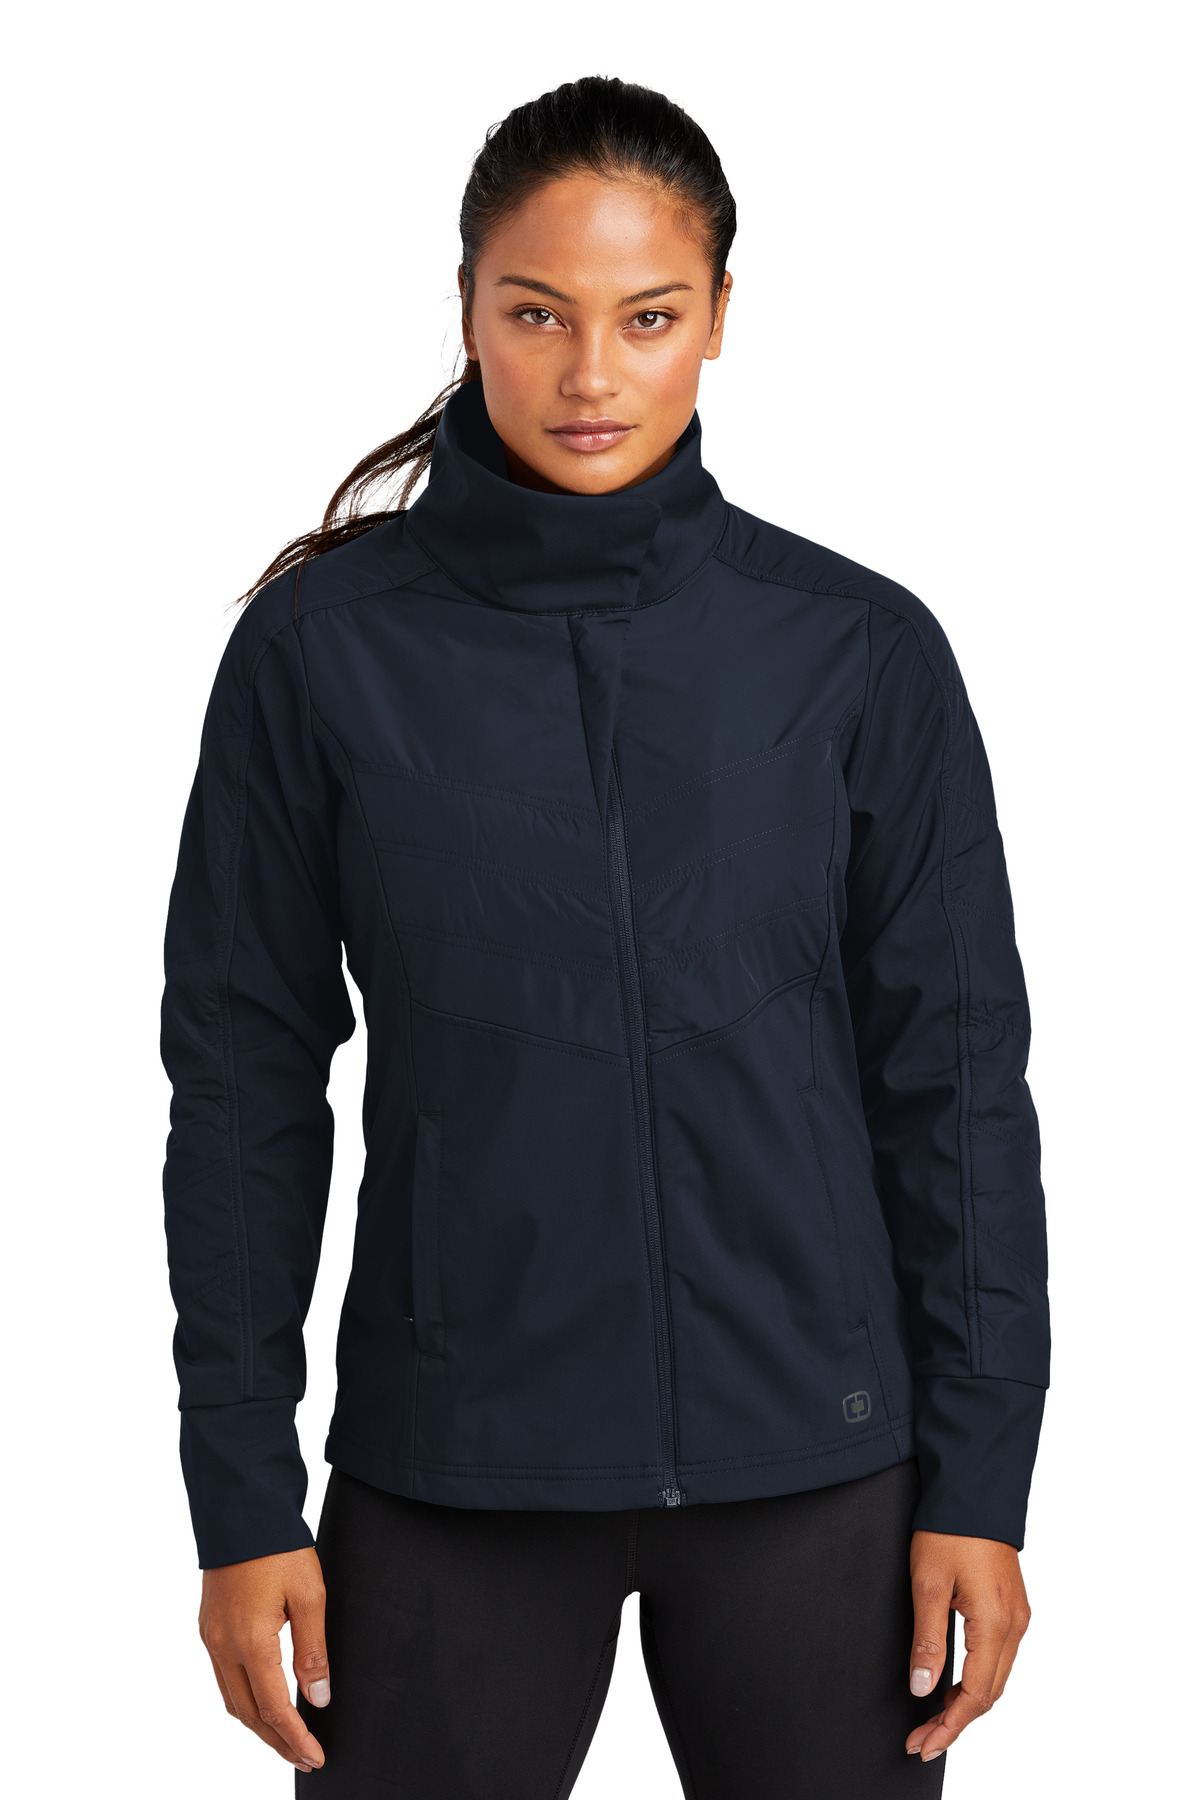 OGIO Ladies Activewear & Outerwear for Hospitality ® ENDURANCE Ladies Brink Soft Shell.-OGIO